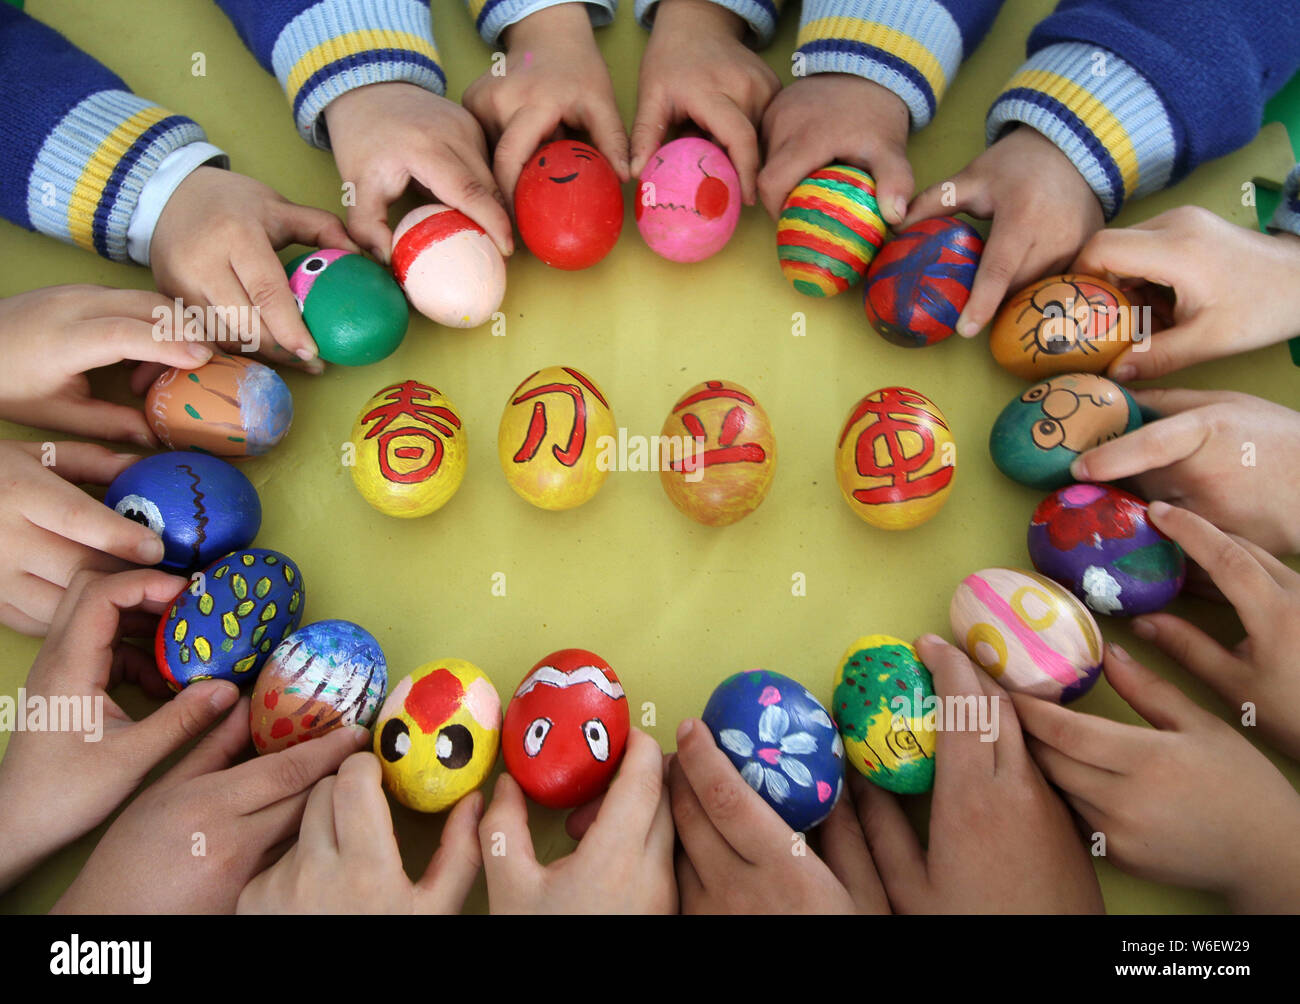 Children show eggs painted with Chinese characters and colors to mark the day of 'Chunfen' (Spring Equinox or Vernal Equinox) at a kindergarten in Han Stock Photo